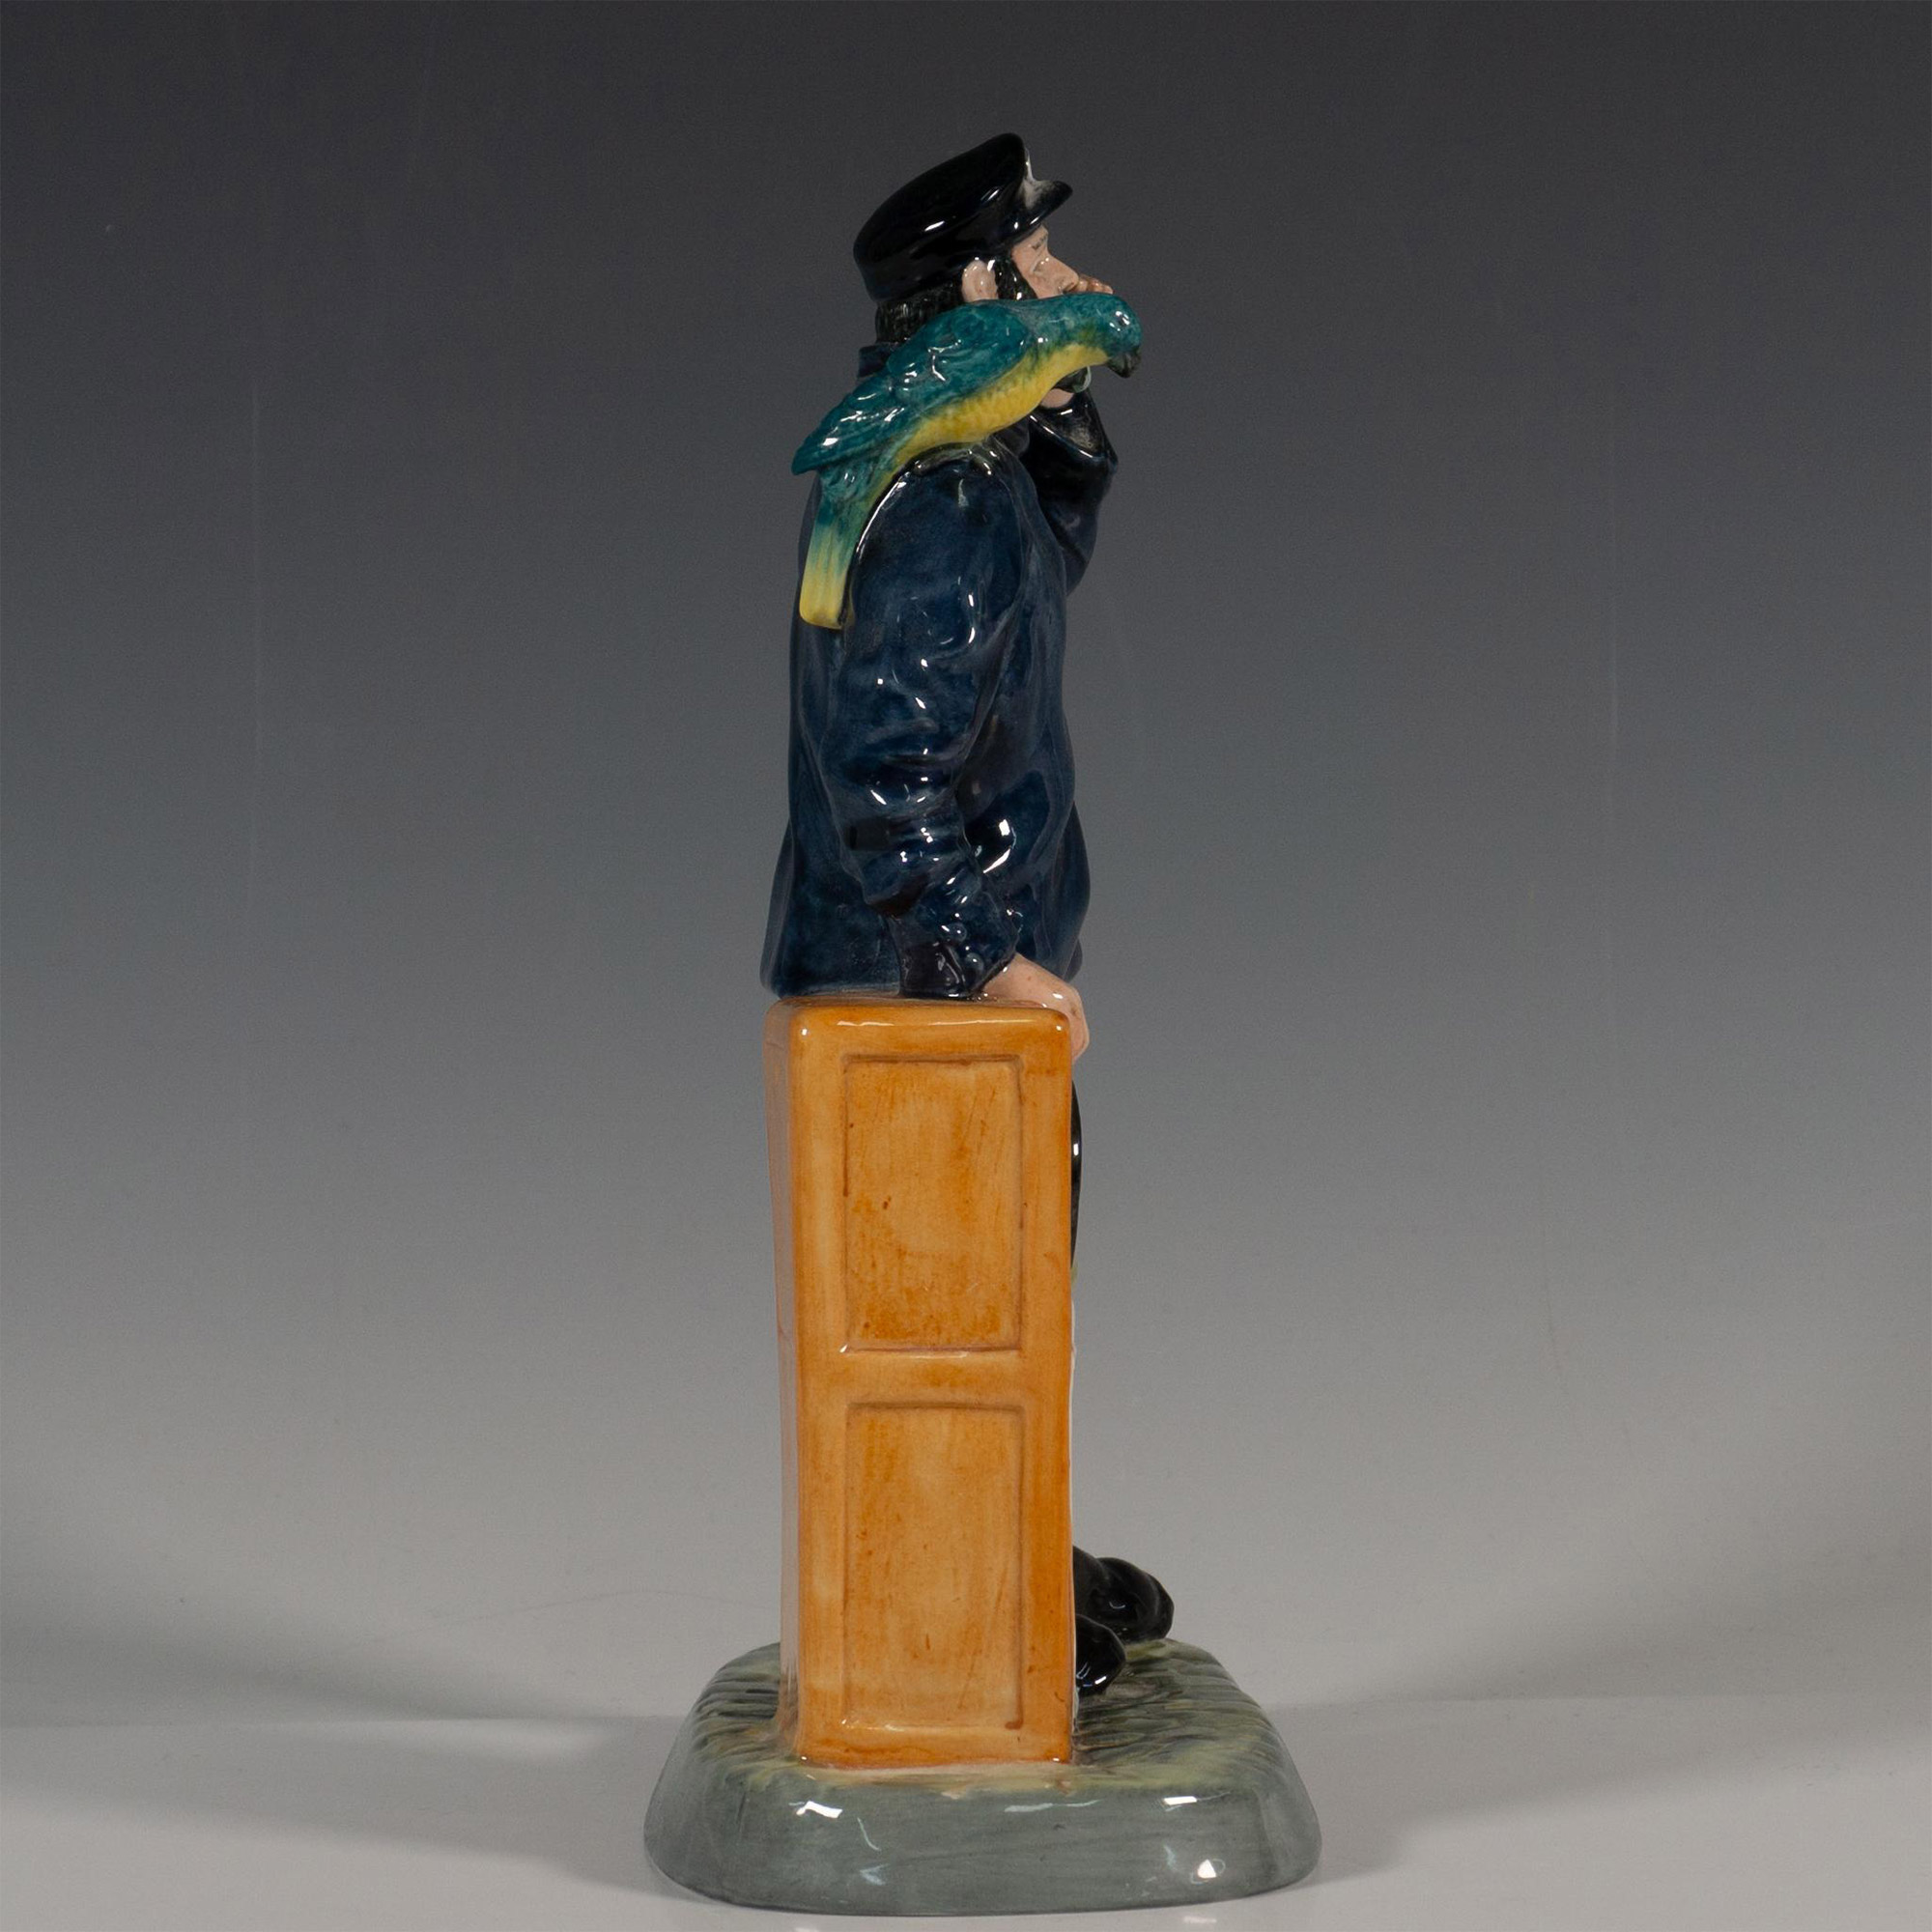 All Aboard HN2940 - Royal Doulton Figurine - Image 3 of 5